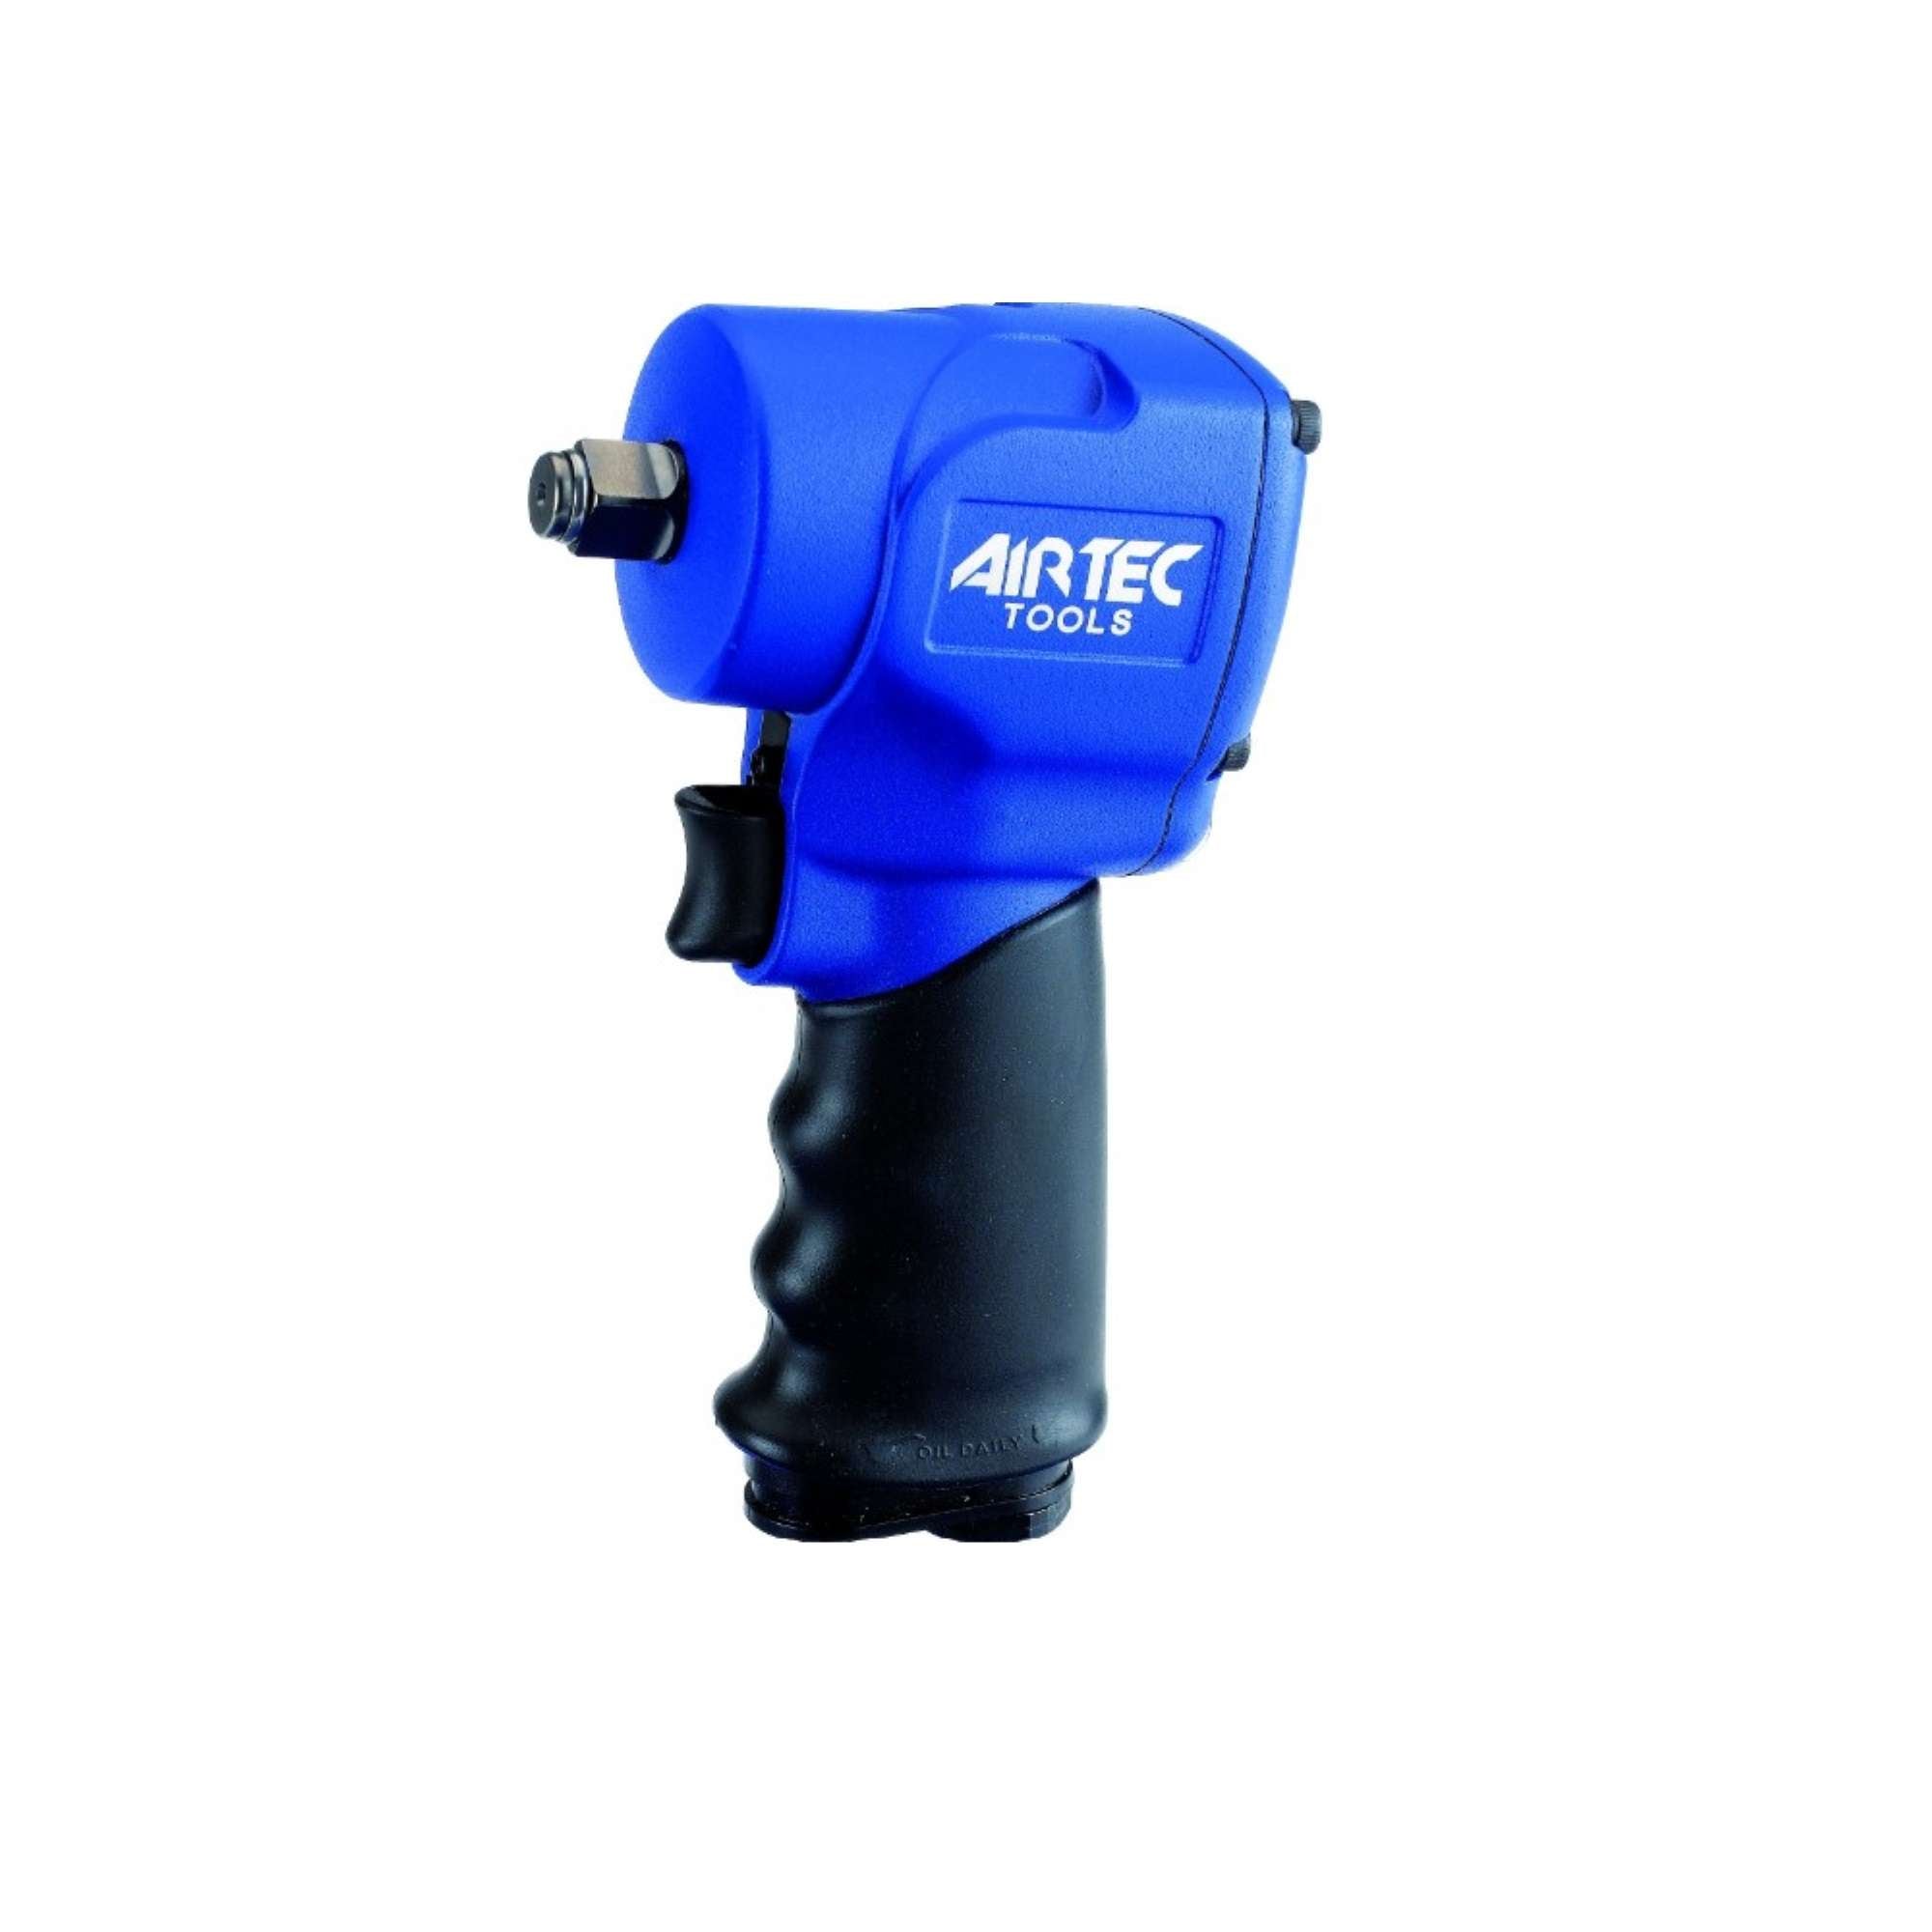 1/2" 104mm Impact Wrench - AirTec 458